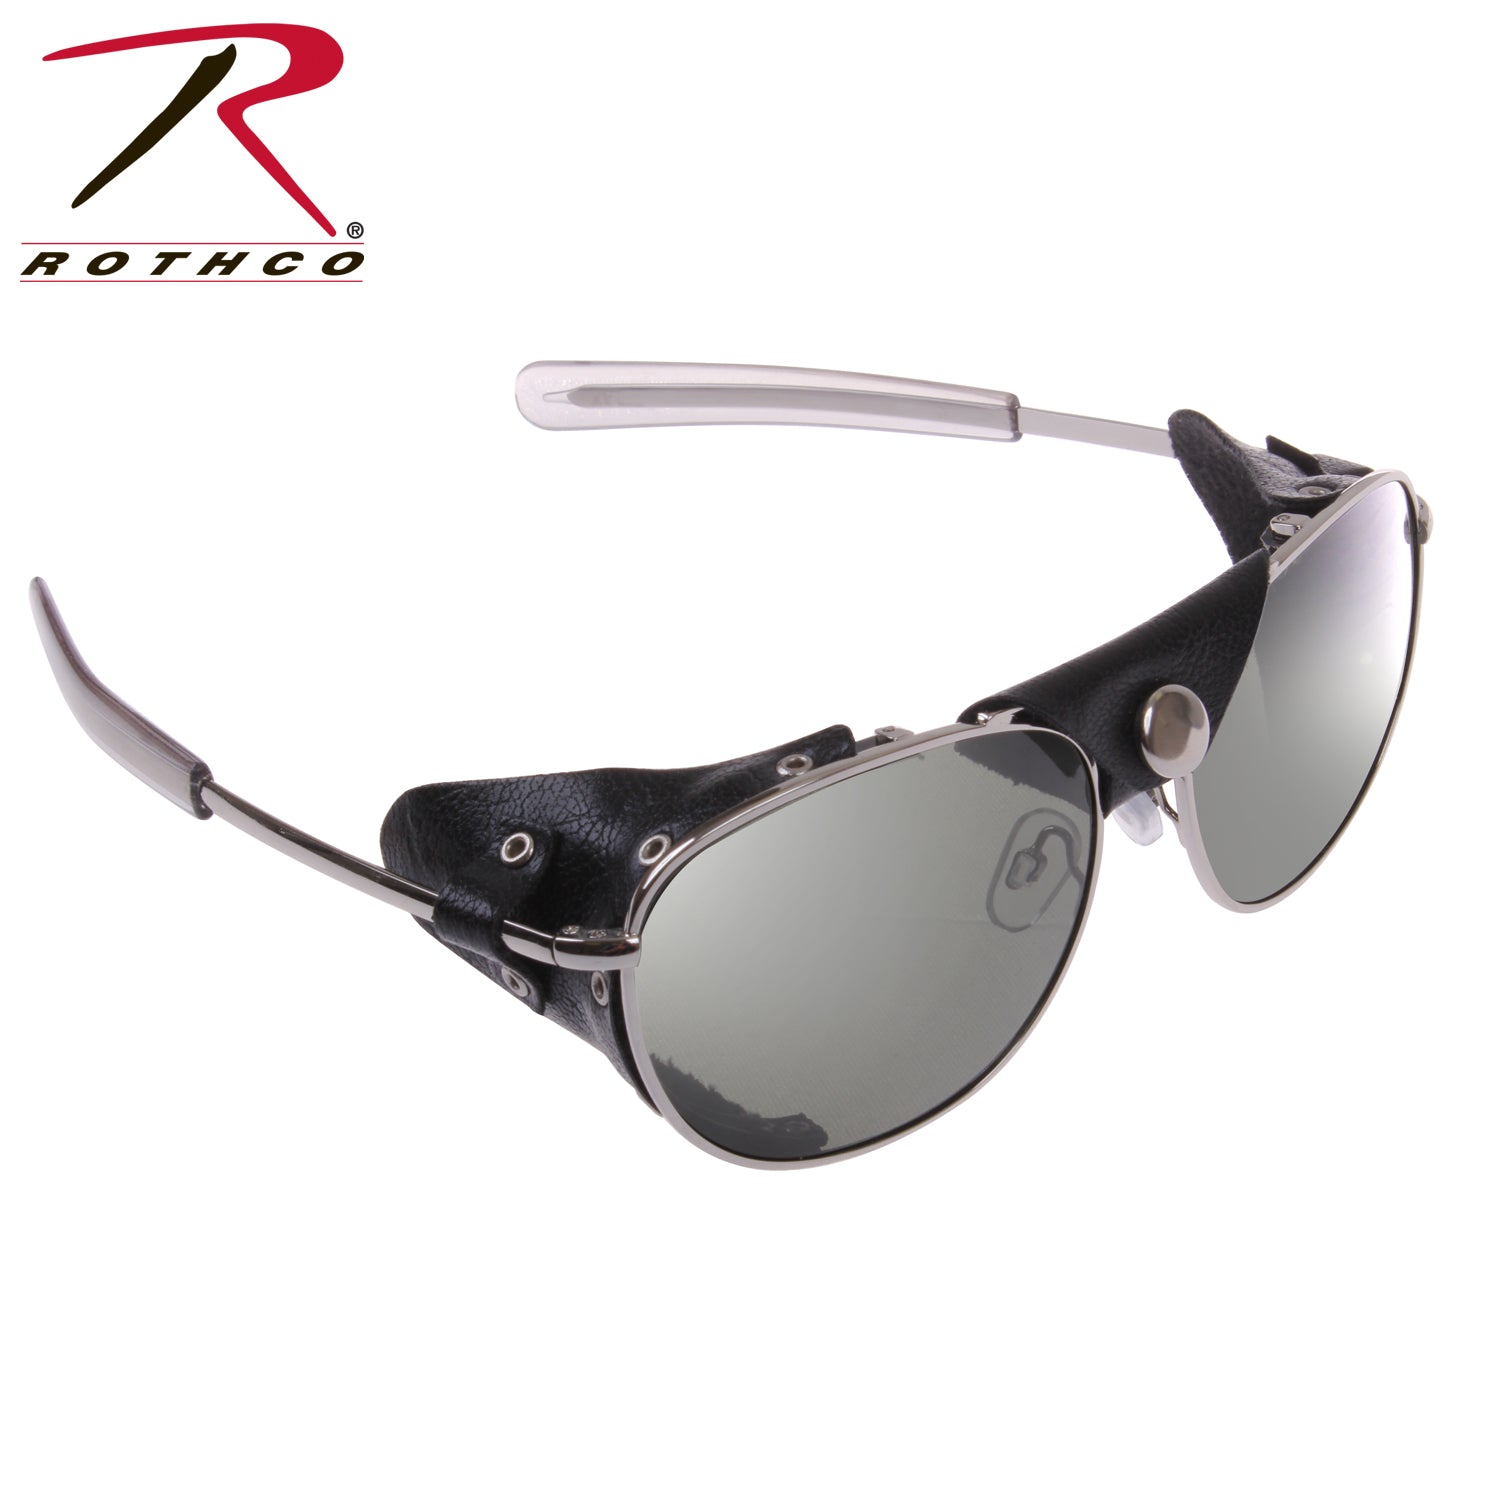 Tactical Aviator Sunglasses With Wind Guards